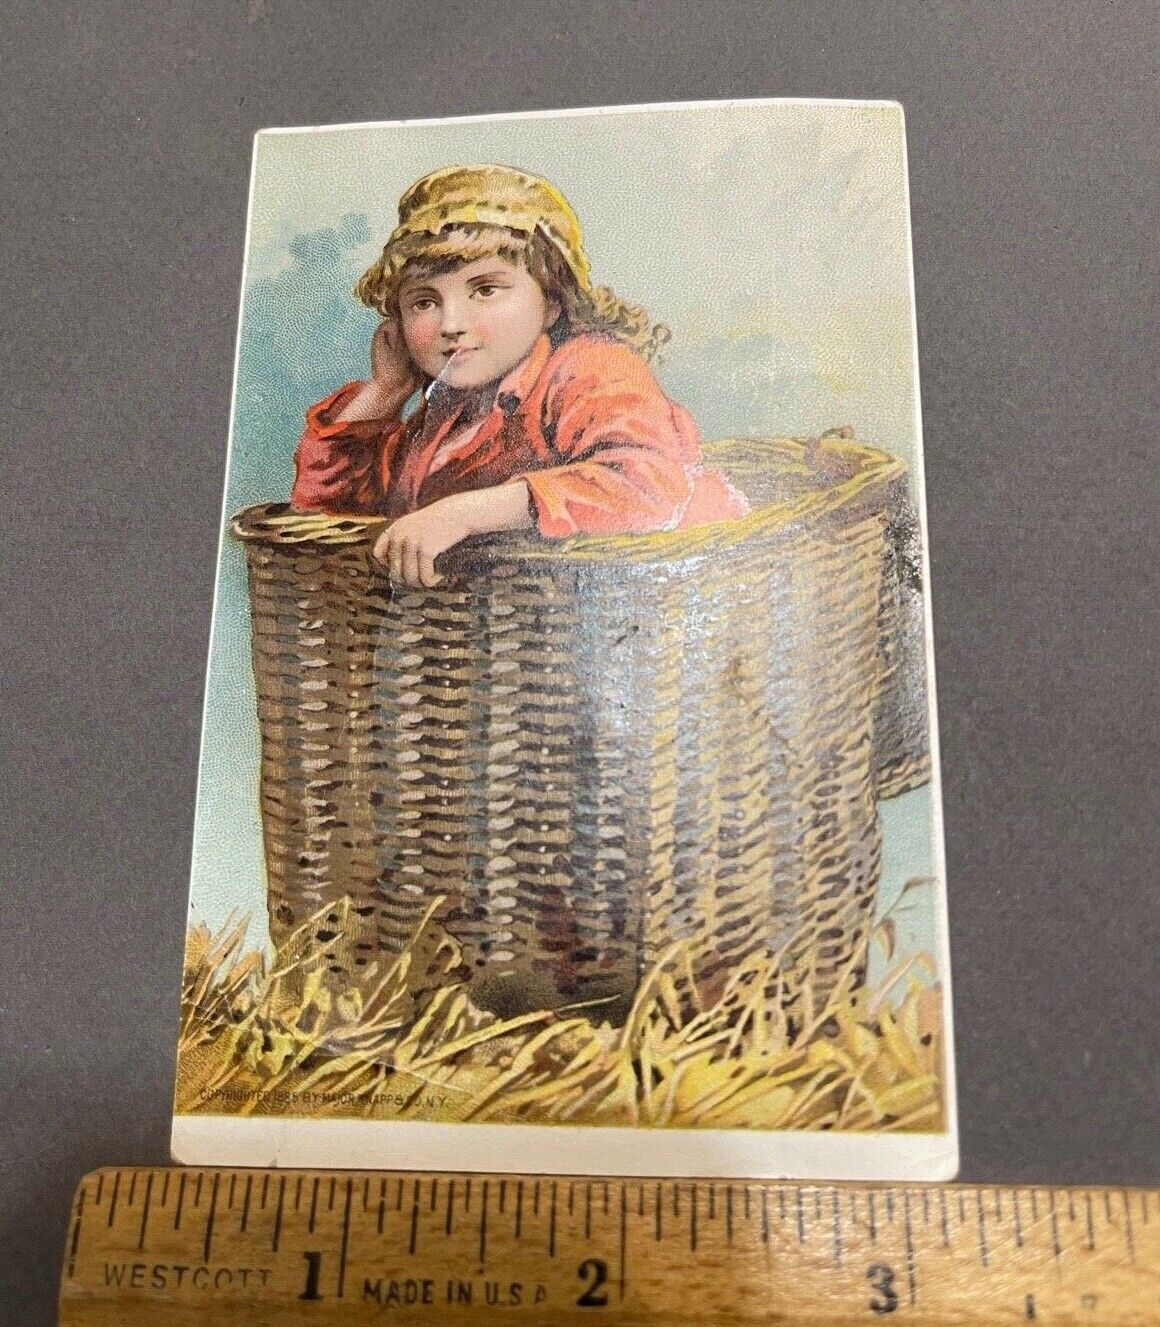 VICTORIAN TRADE CARD BUILD YOUR OWN LOT $5 EACH 10% OFF 2 0R MORE shipping $3